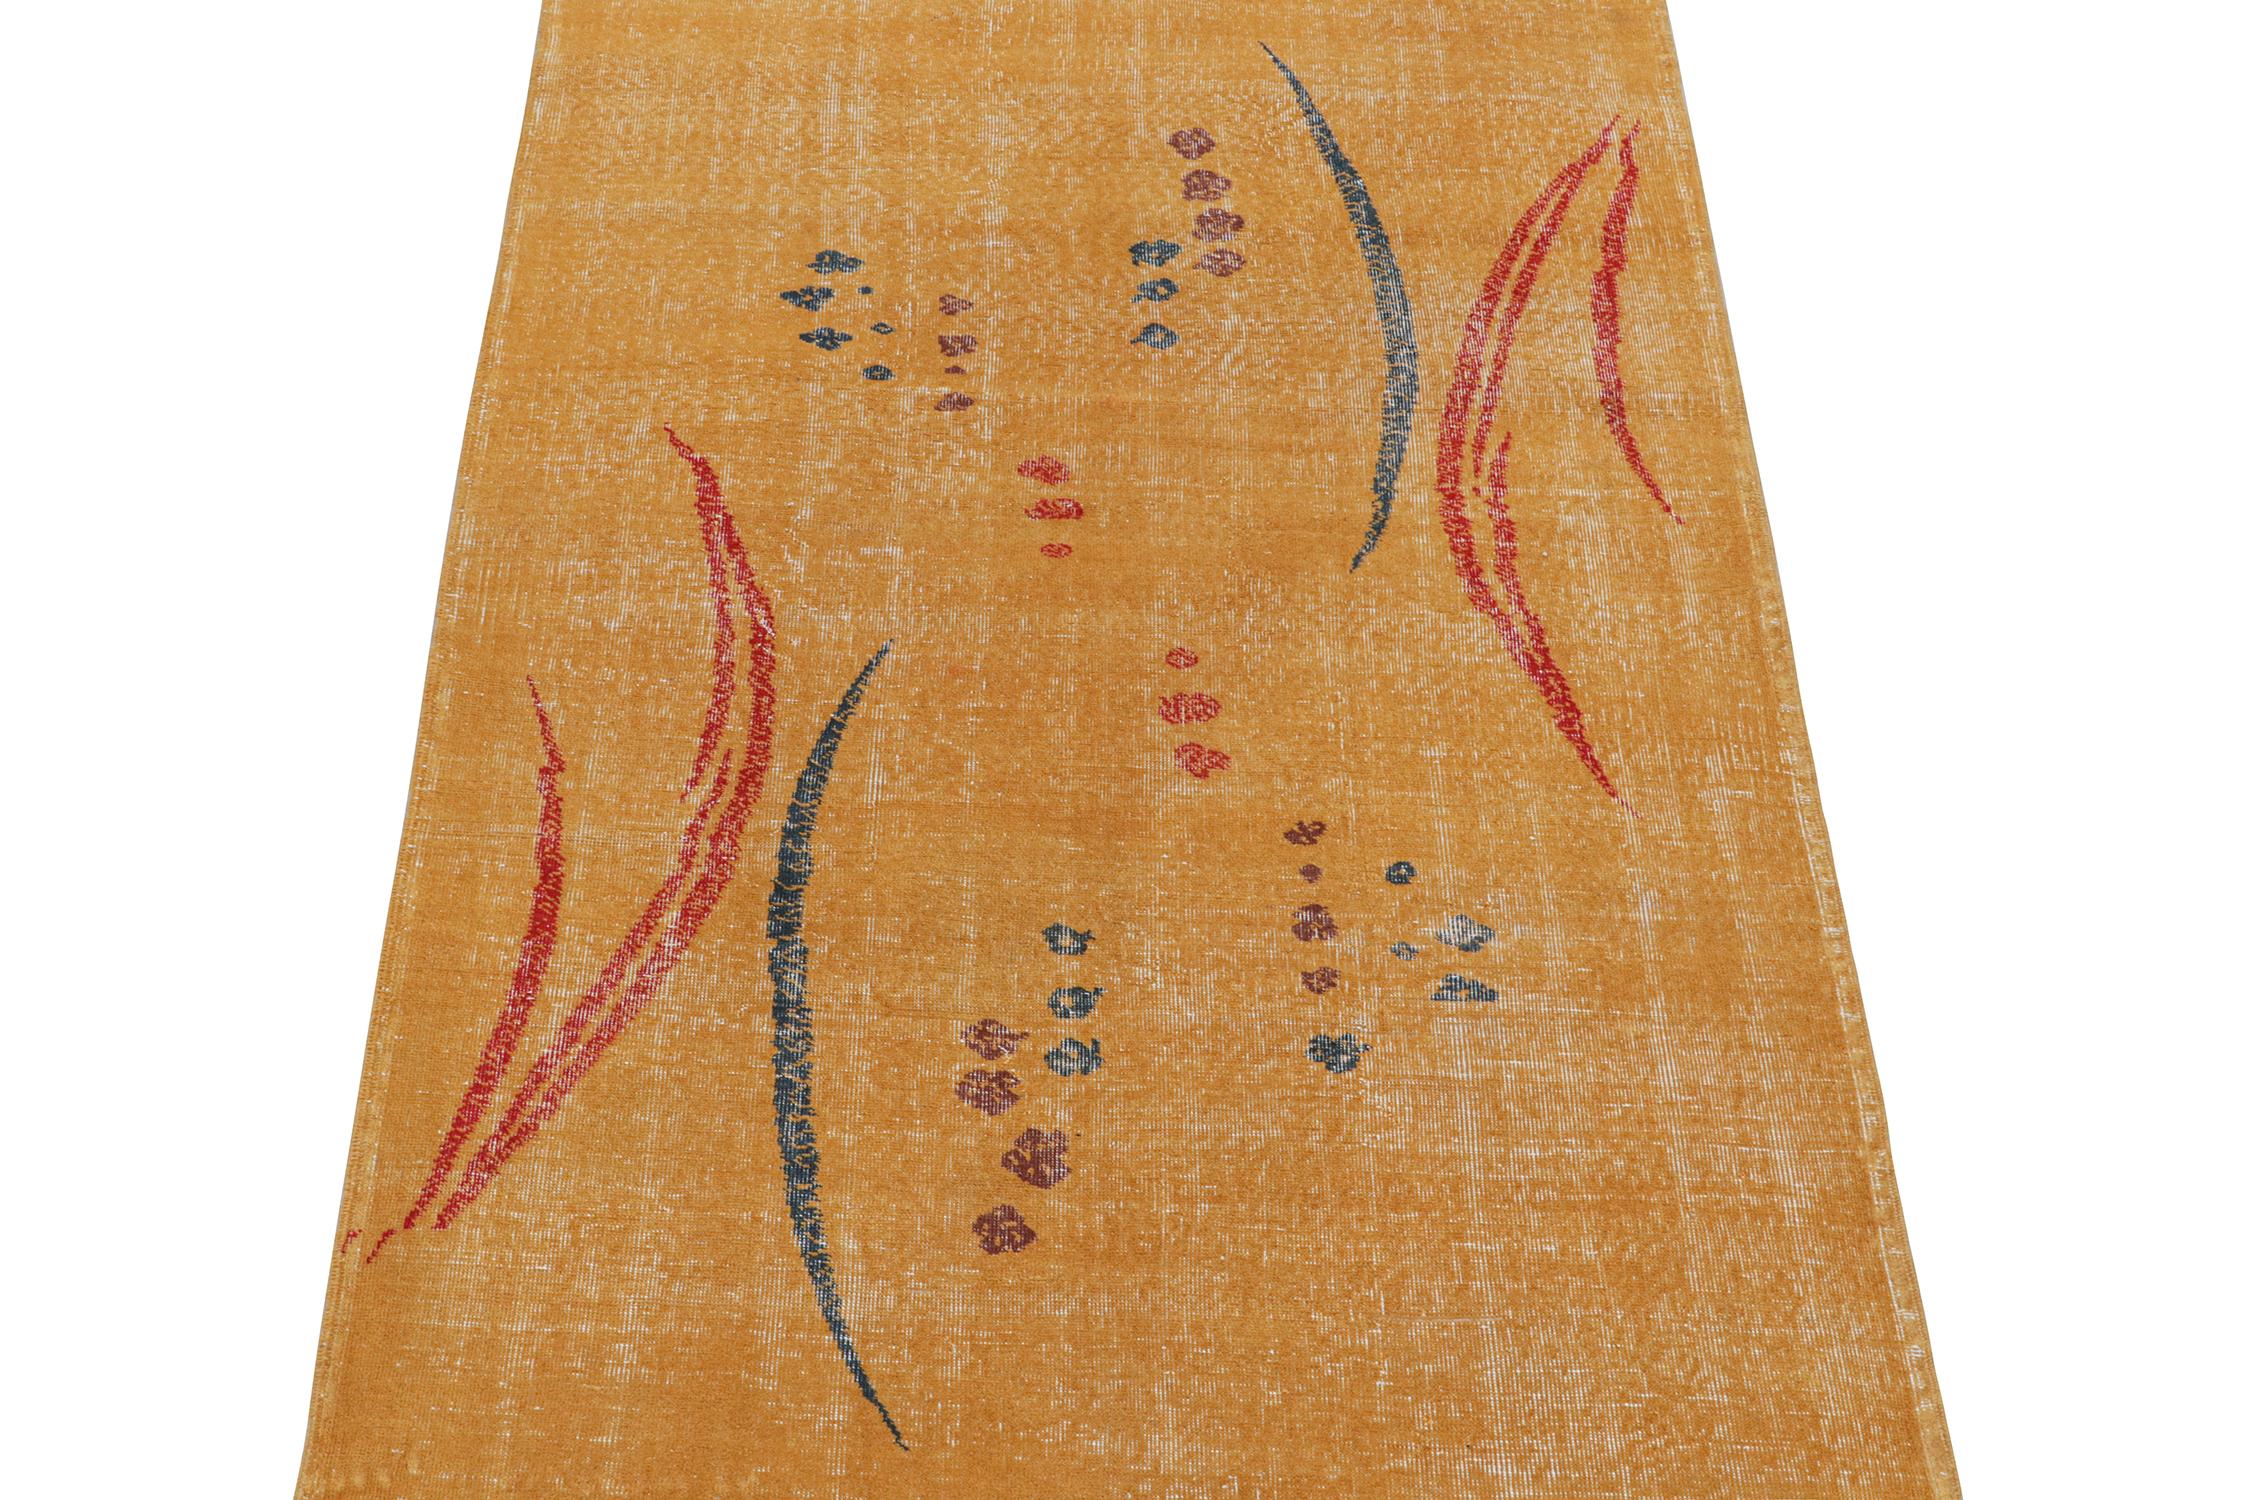 This vintage 5x8 rug from Turkey is an exciting new addition to Rug & Kilim’s Mid-Century Pasha Collection. This line is a commemoration, with rare curations we believe to hail from multidisciplinary Turkish designer Zeki Müren. Hand-knotted in wool